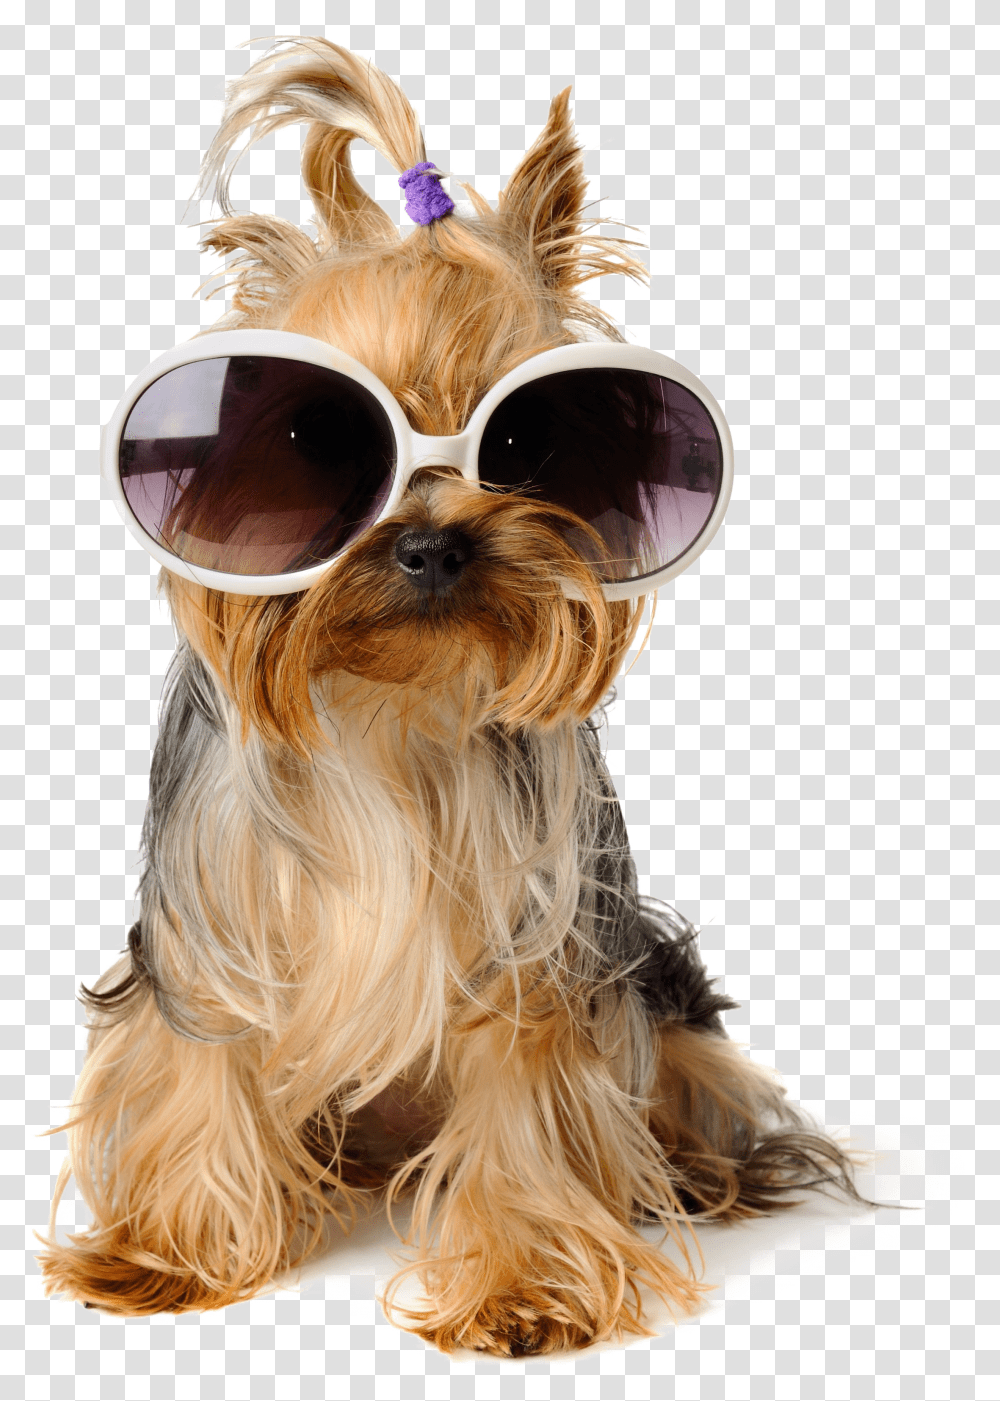 Shaggy Sitting Pet Greeting Dog Birthday Puppy Clipart Dog With Sunglasses Transparent Png